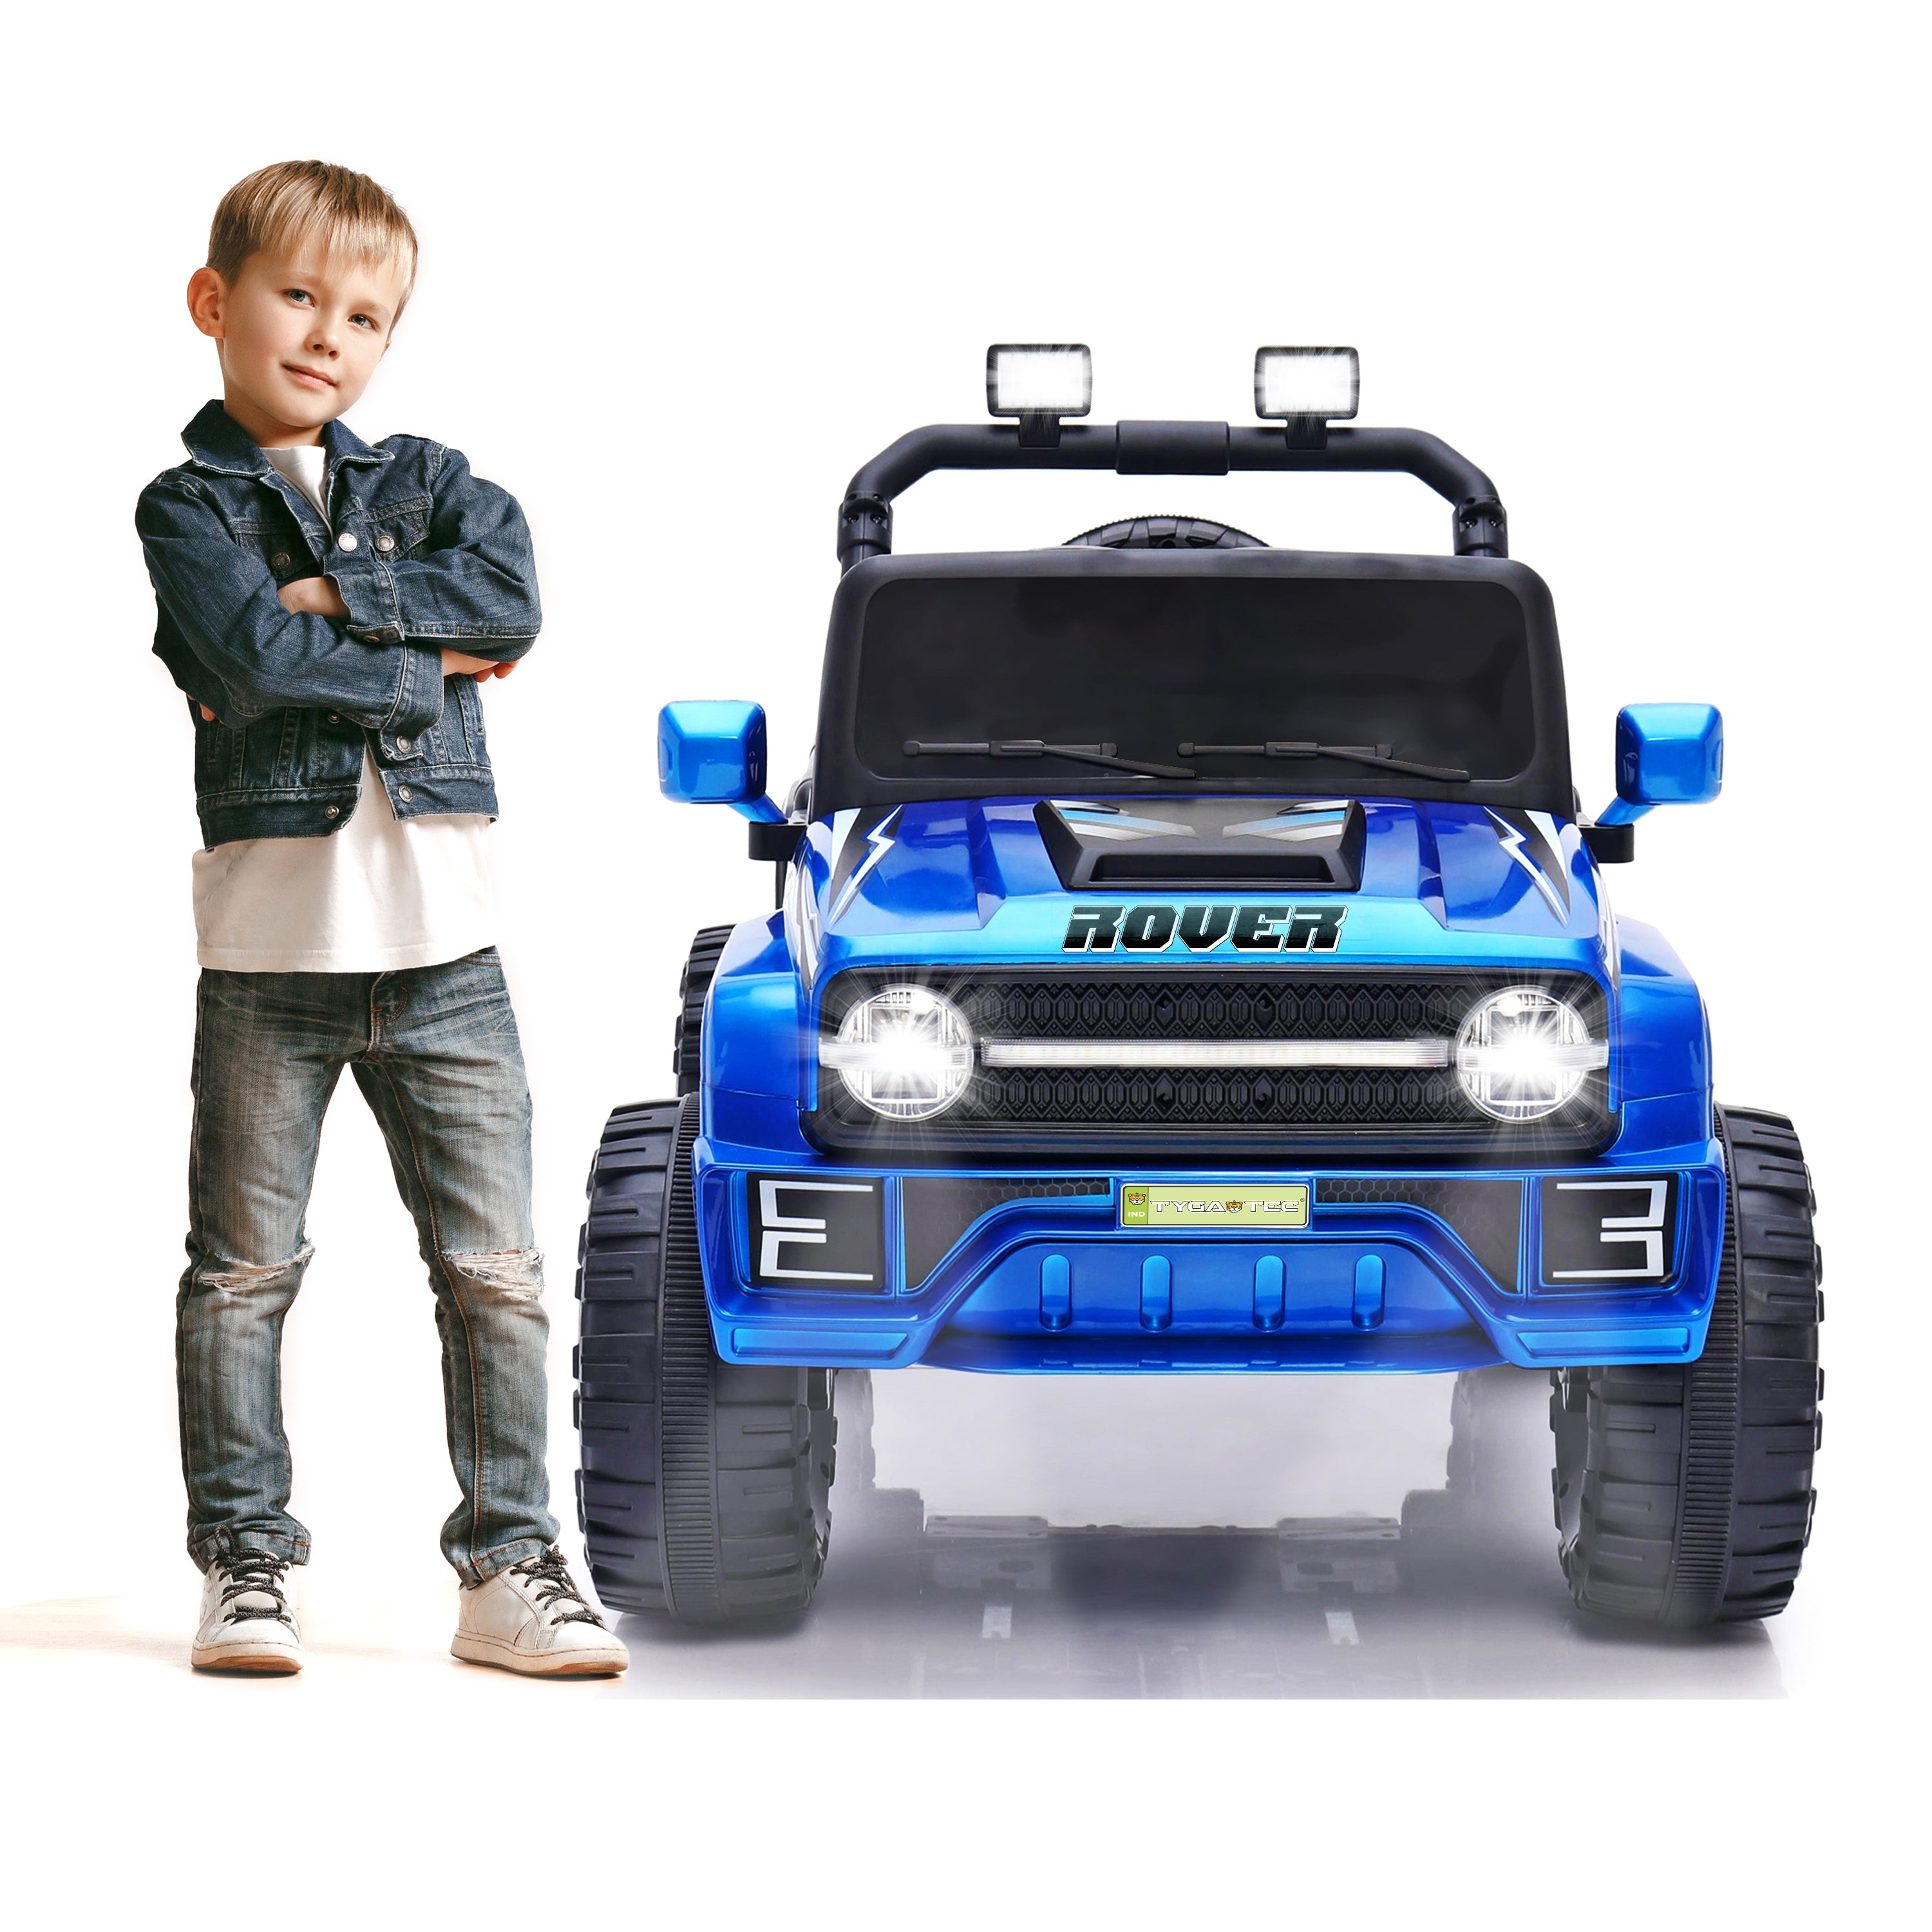 Tygatec Ride-on Kids Car Ground Force ROVER (BLUE COLOUR)